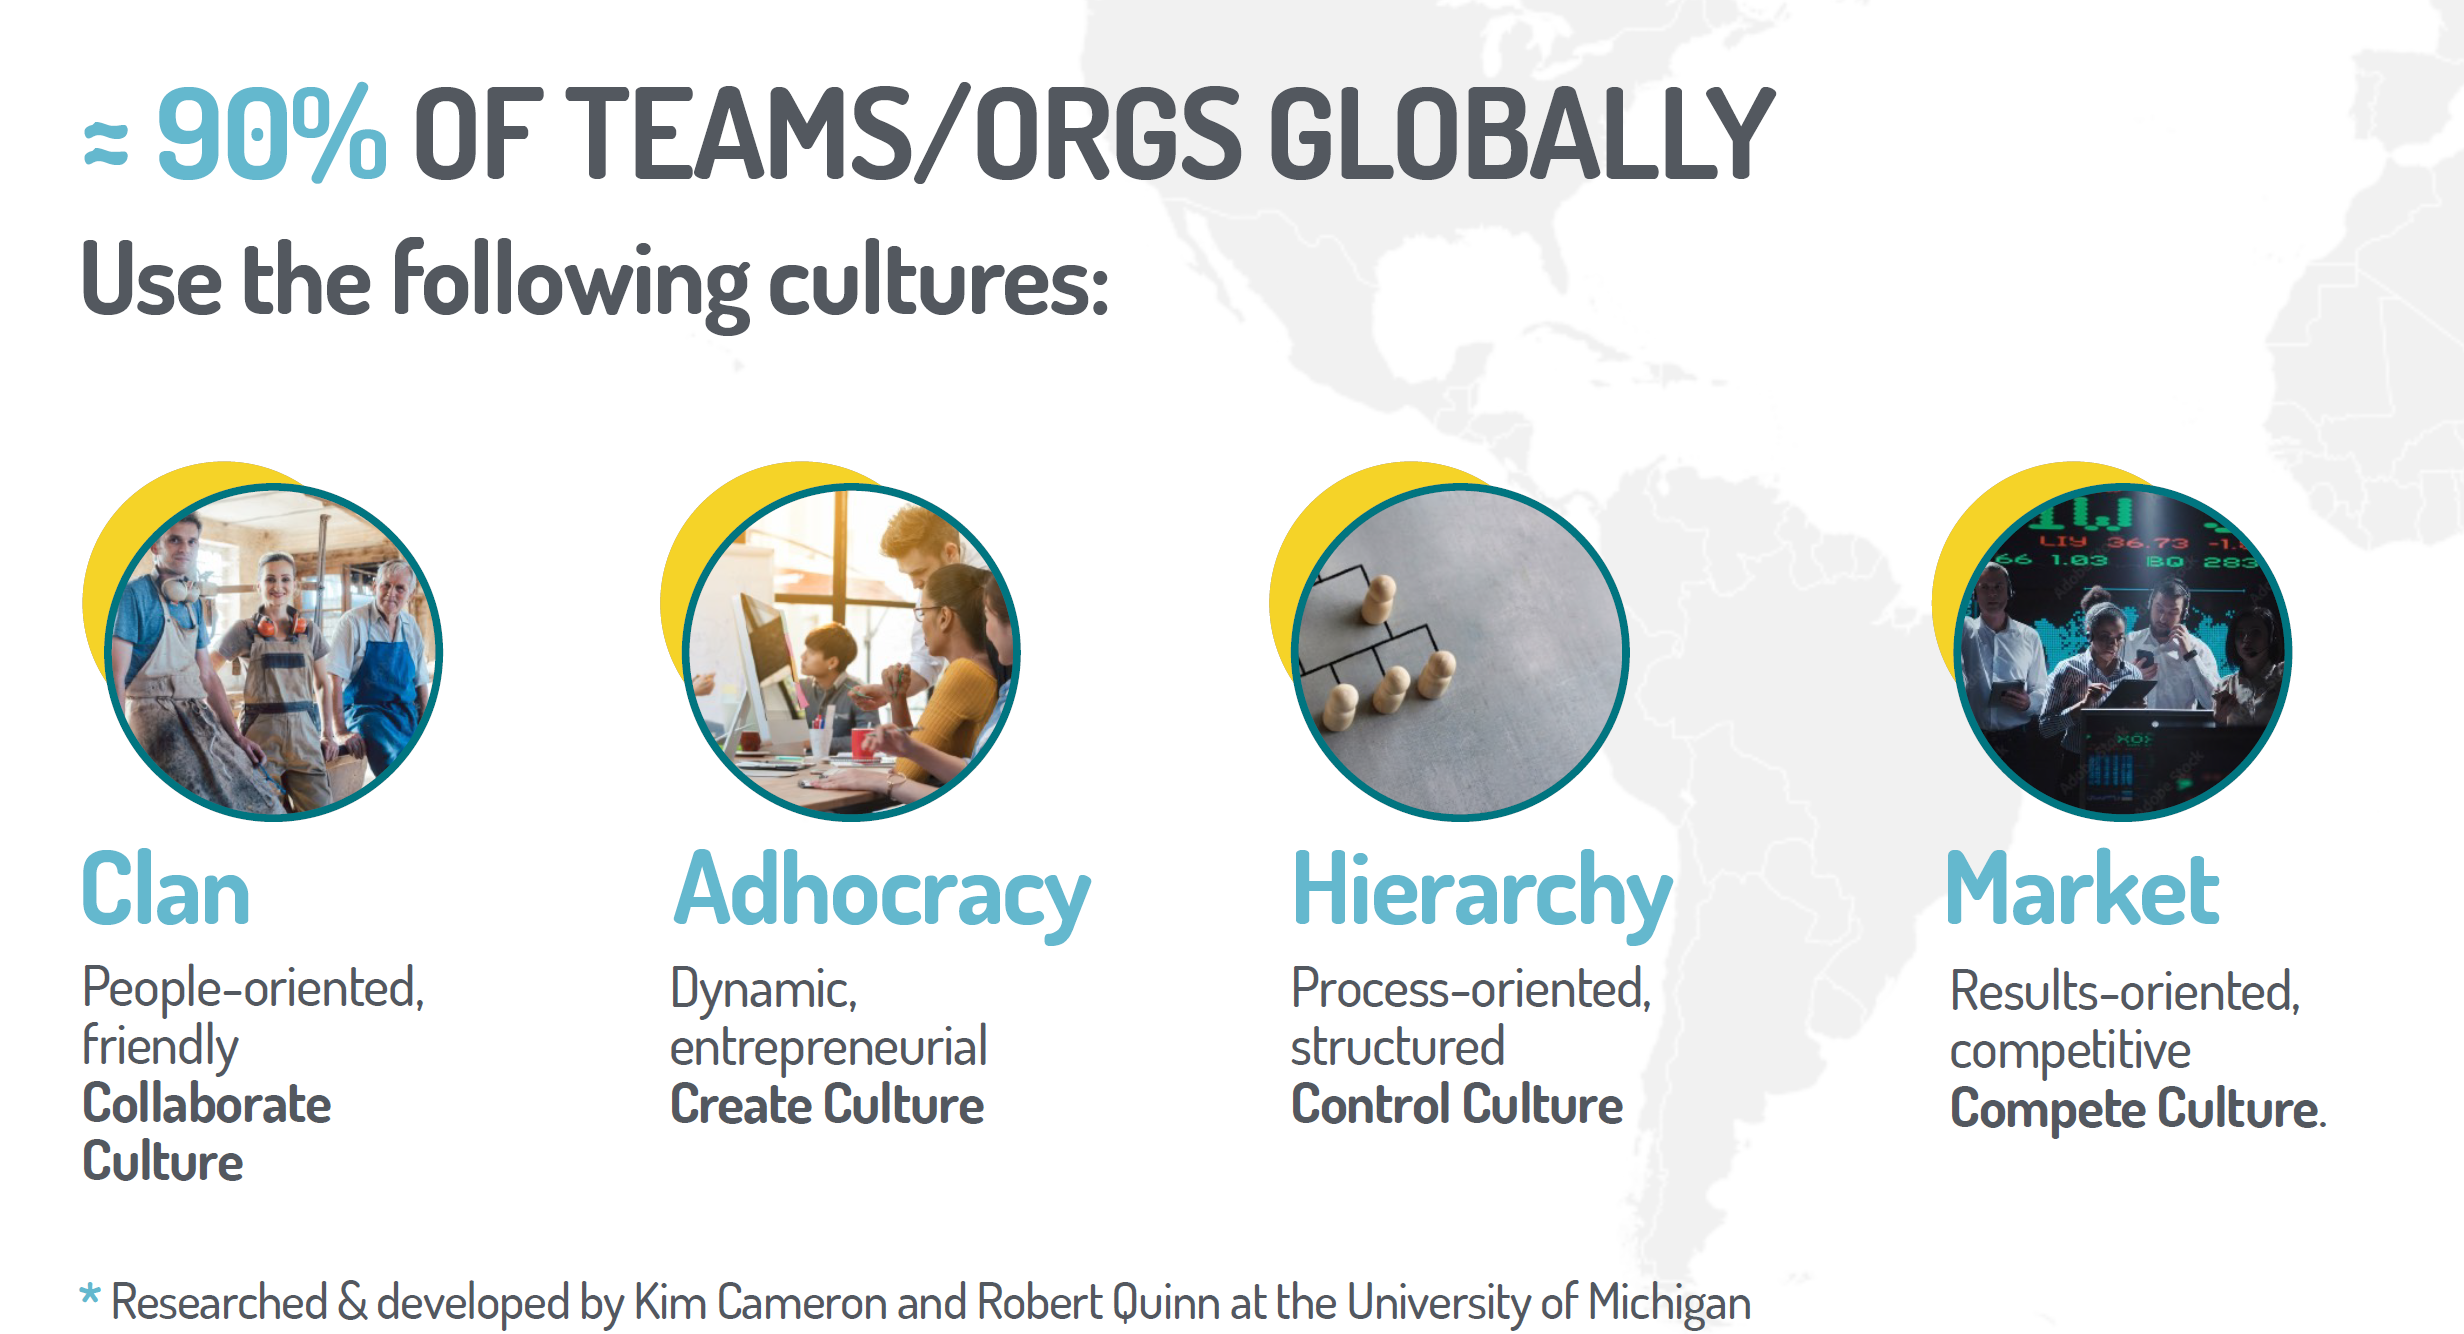 90% of global teams use the following cultures - Clan, Adhocracy, Hierarchy and Market